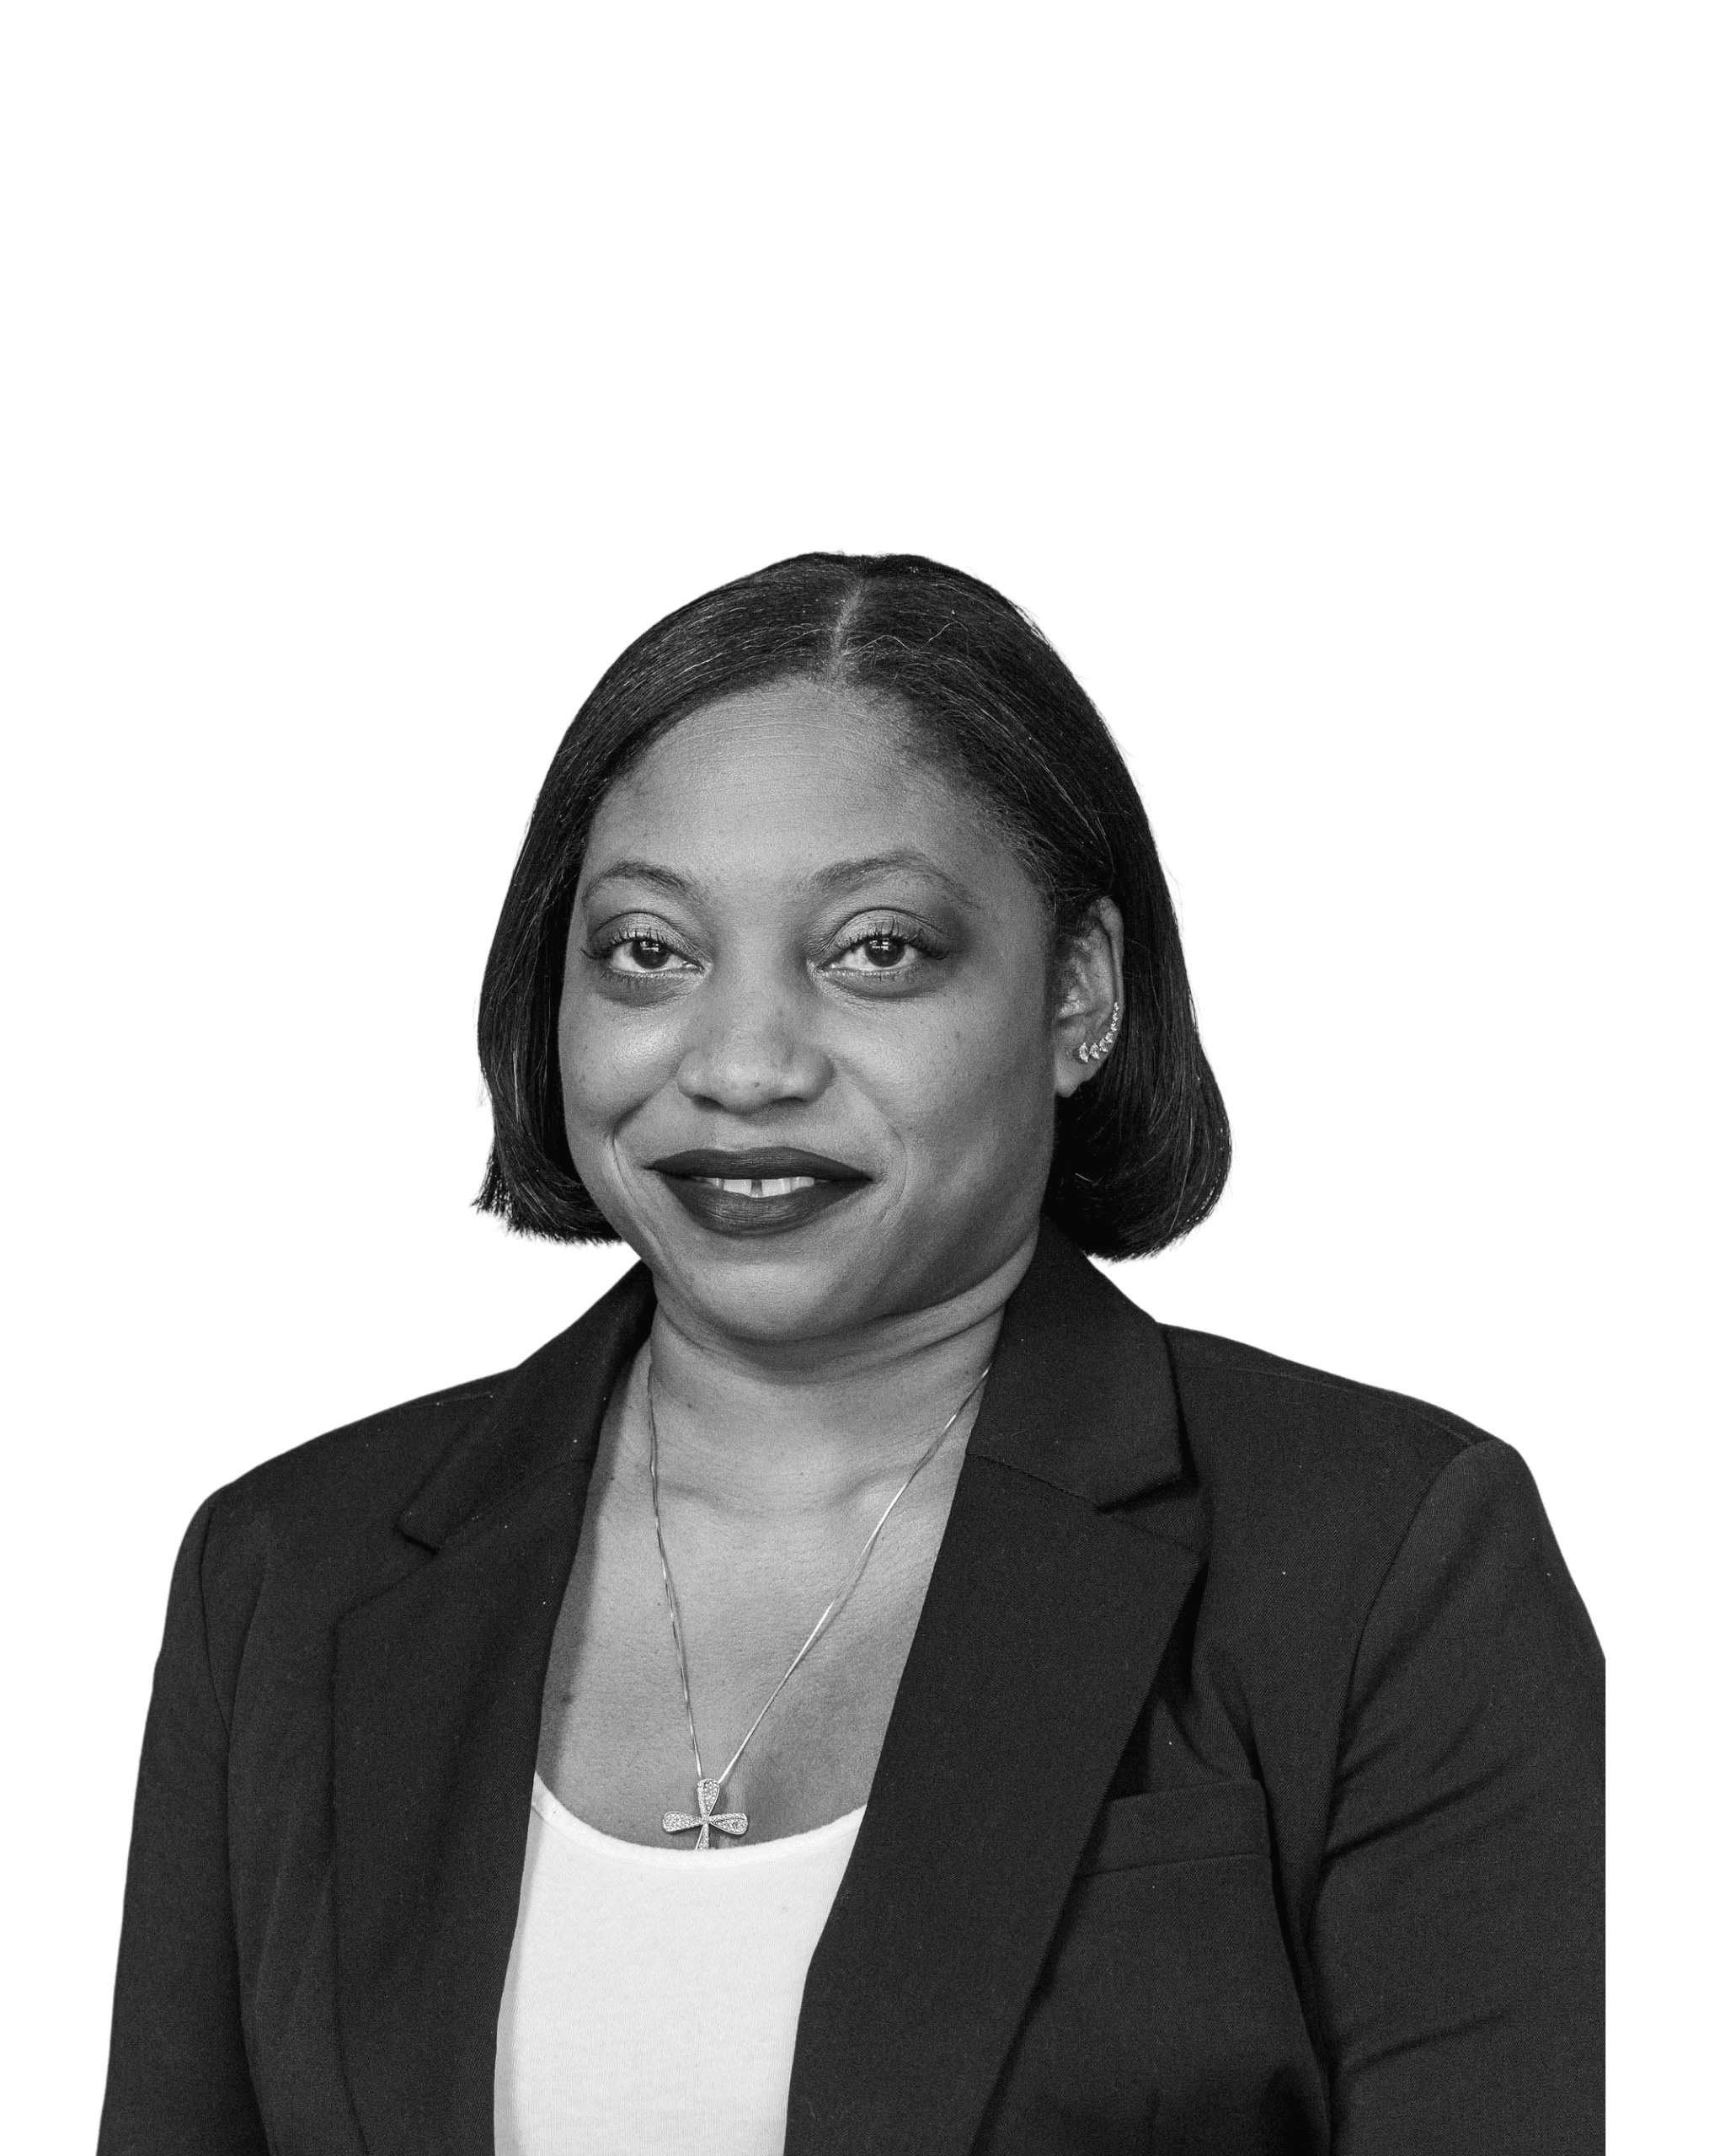 Adriene Coney is a Revenue Analyst at Valor